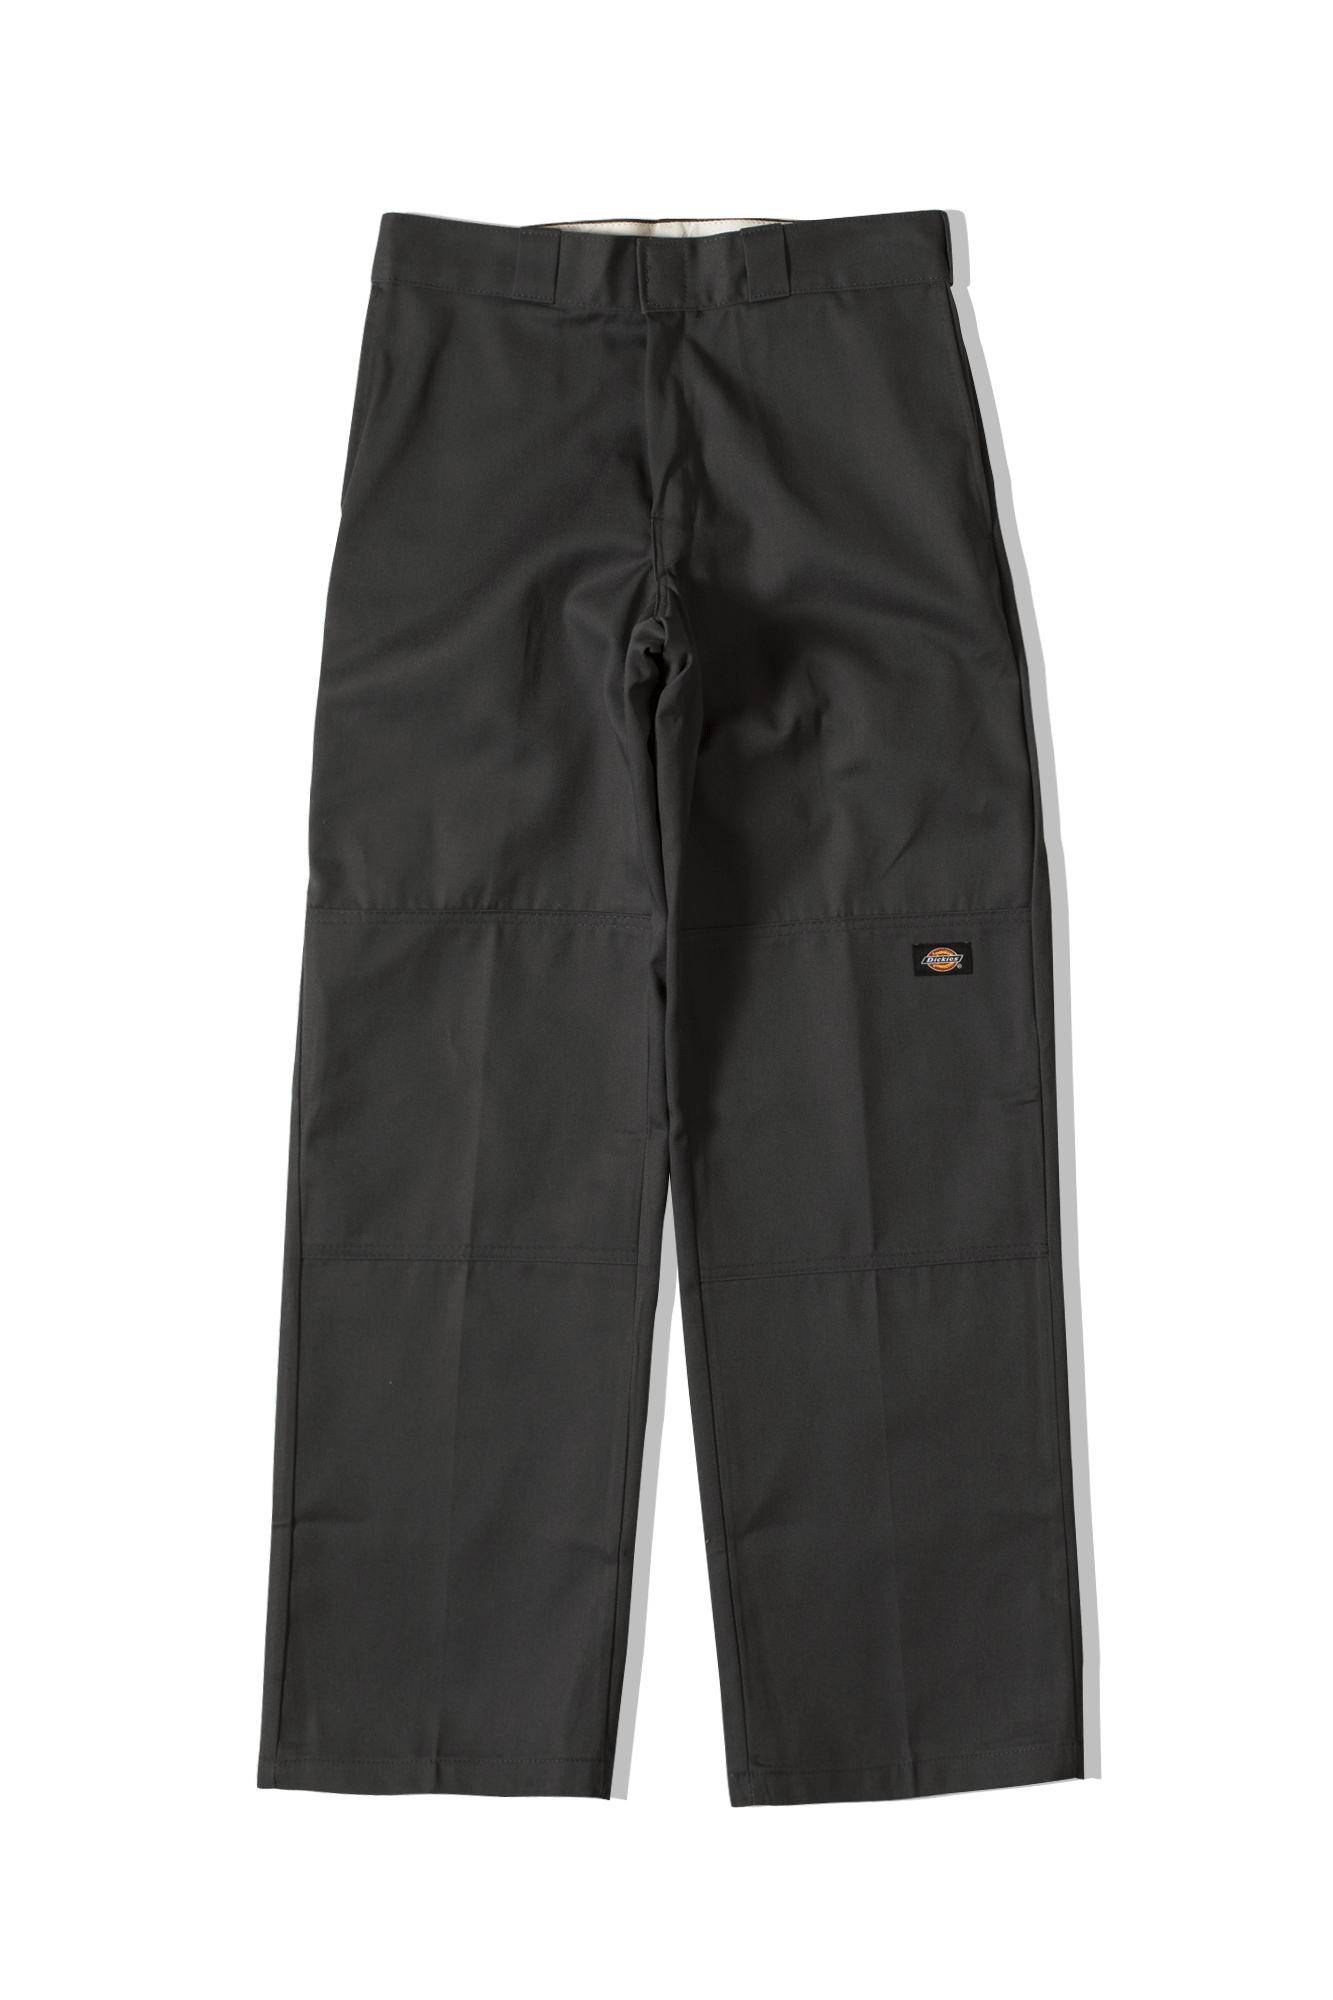 Dickies Pantaloni classici Double Knee Work Trousers Grigio 684190022#000#CH#30/32 - One Block Down